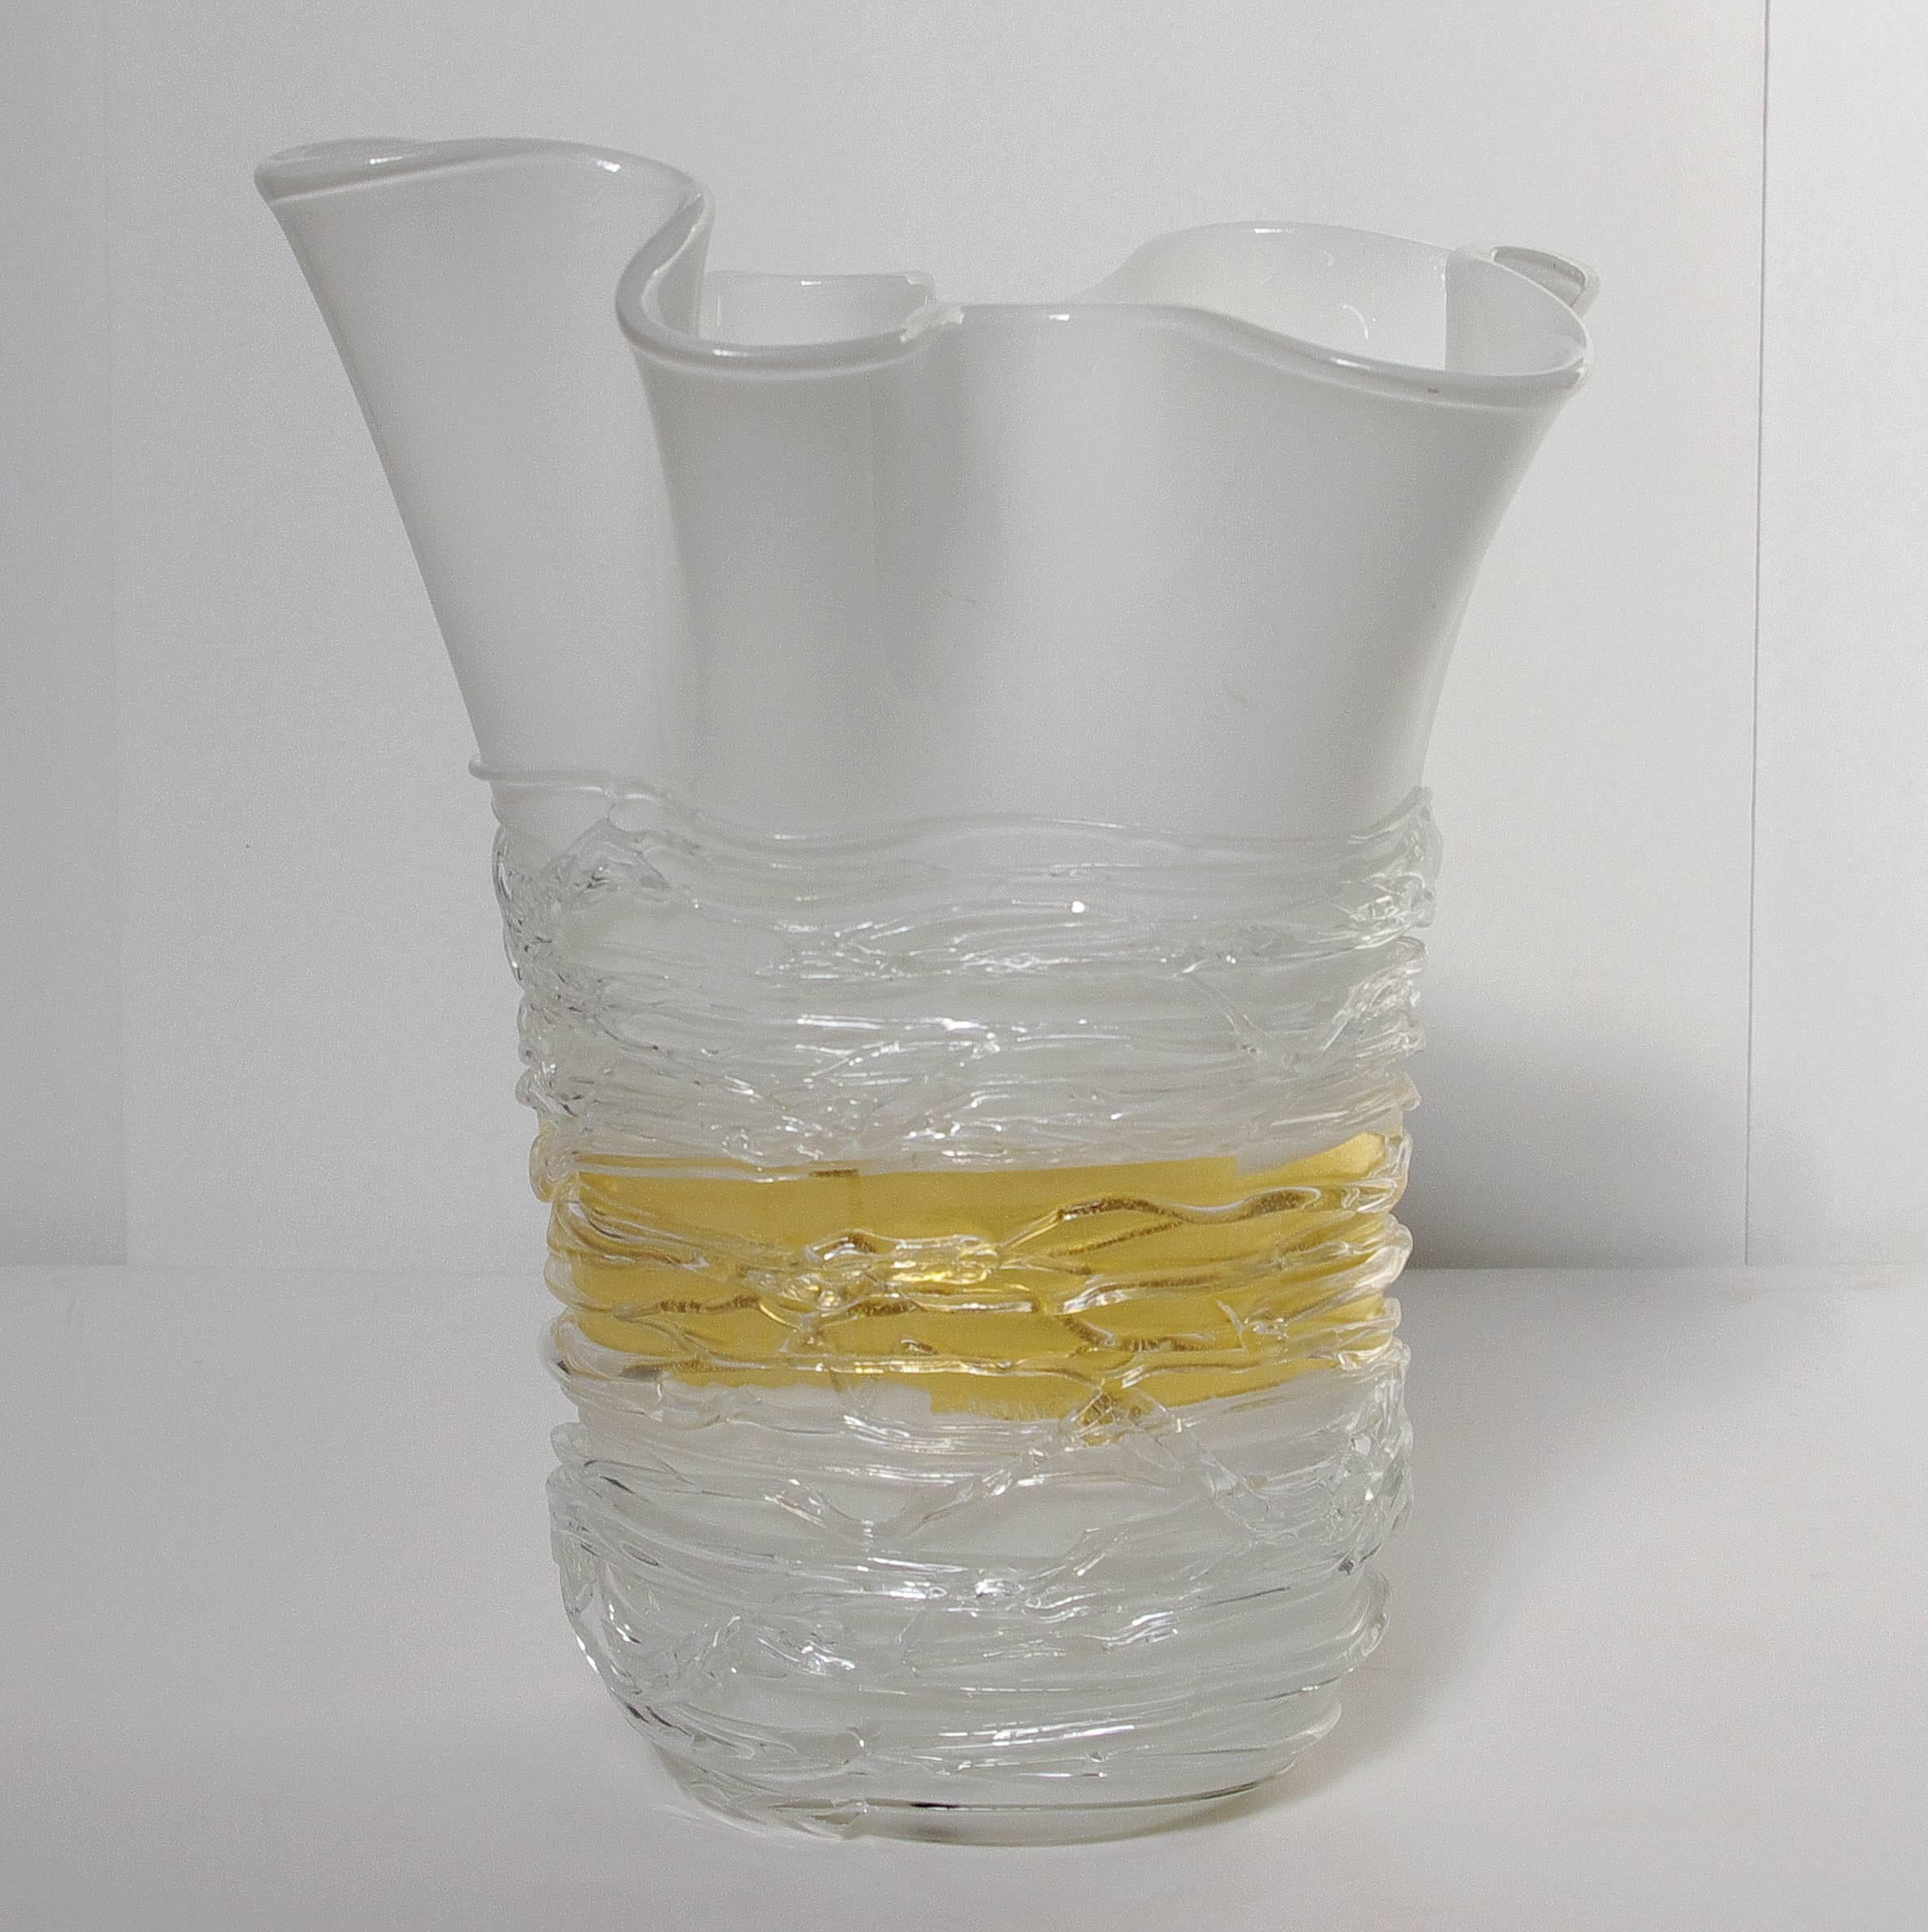 Vintage Italian white and gold Murano glass vase by Camozzo, signed on the base
Made in Italy in the 1960’s
Height: 13 inches / Diameter: 10.5 inches
1 in stock in Palm Springs currently ON 40% OFF SALE for $749!!!
Order Reference #: FABIOLTD